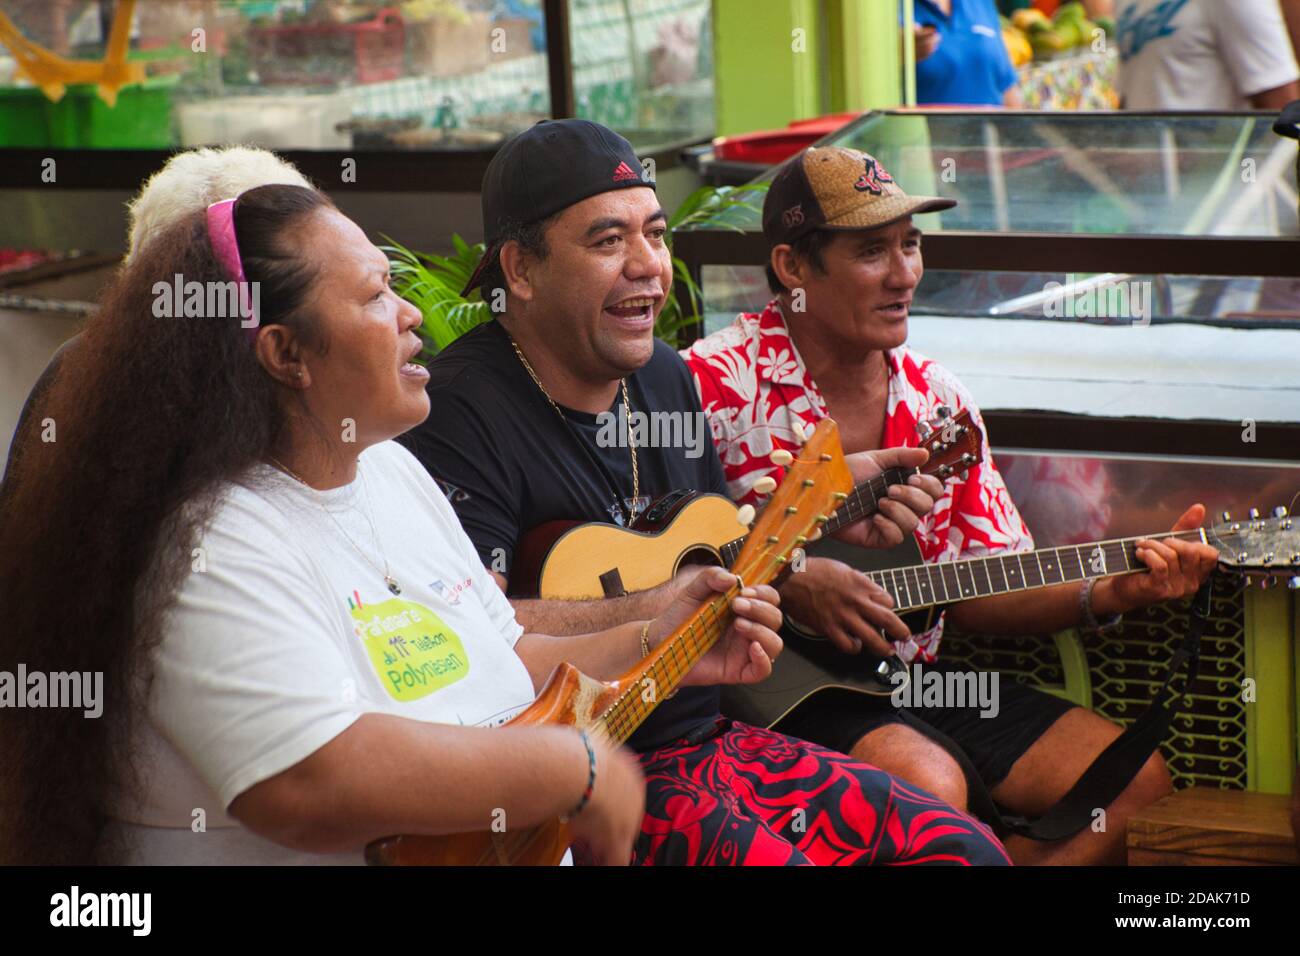 Two Men and a woman with guitar and ukuleles play impromptu music and sing on a street in Papeete, Tahiti, French Polynesia Stock Photo